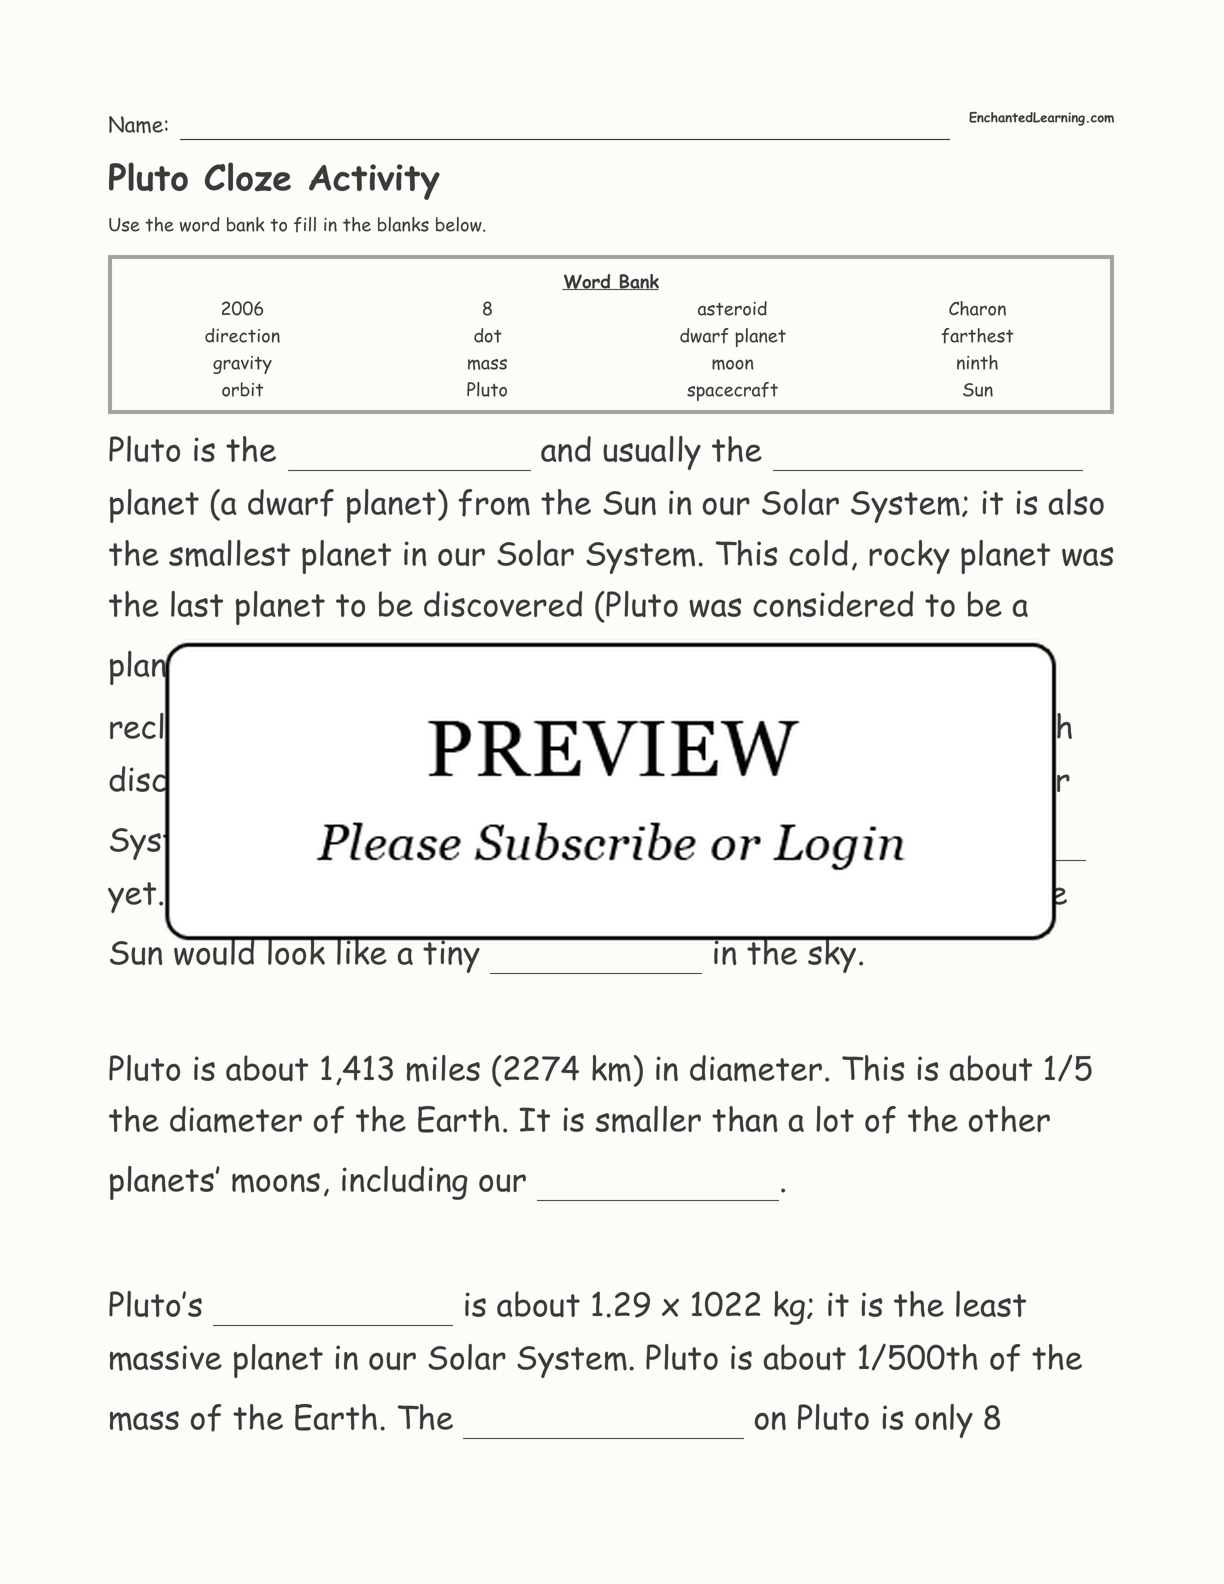 Pluto Cloze Activity interactive worksheet page 1